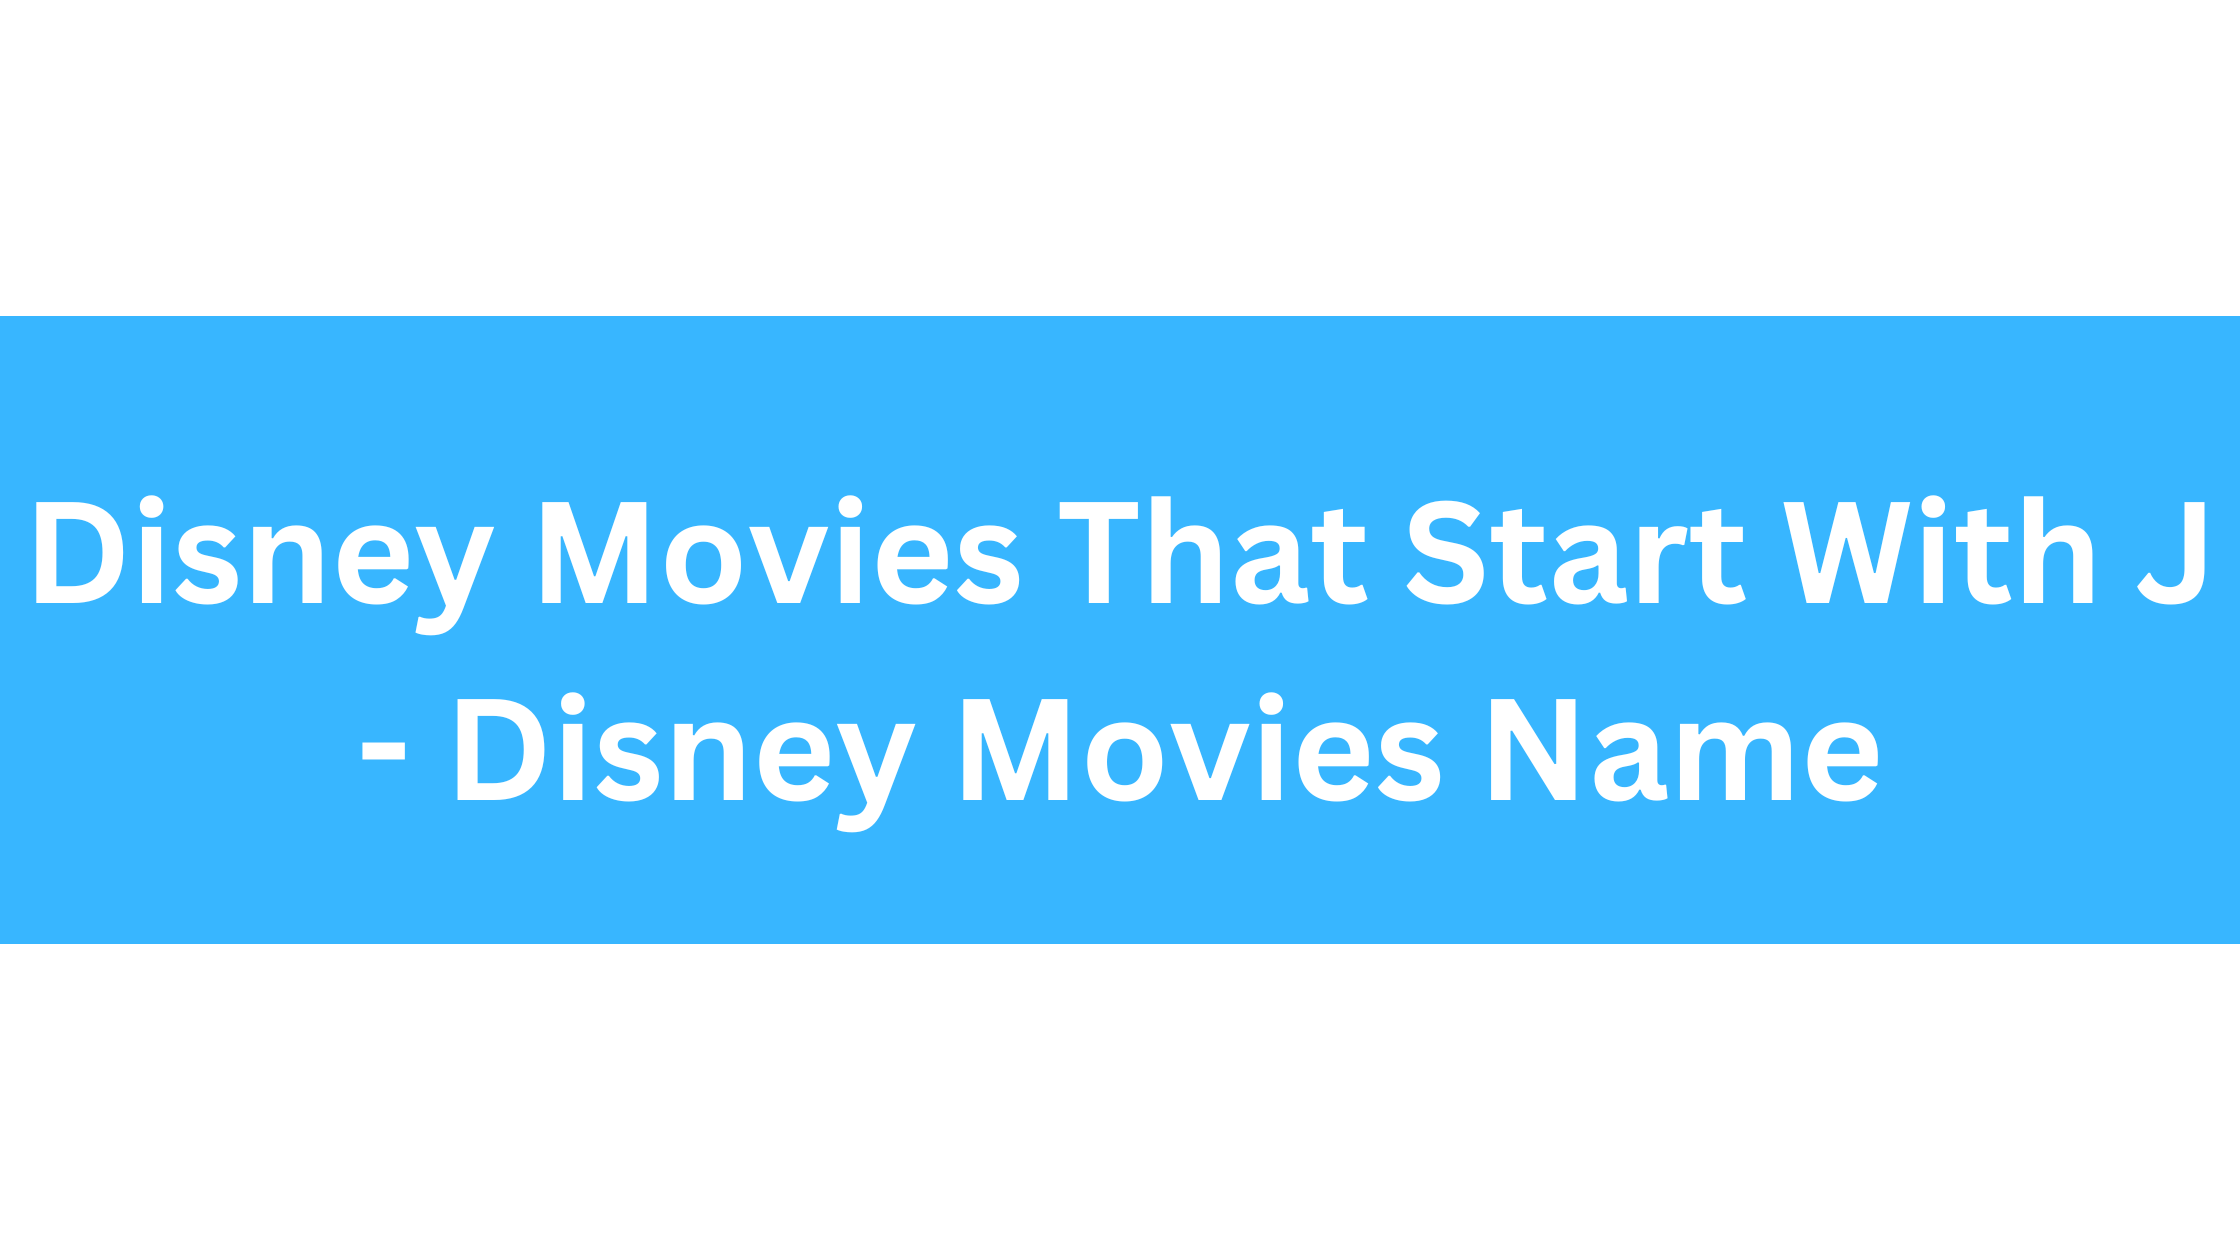 Disney Movies That Start With J